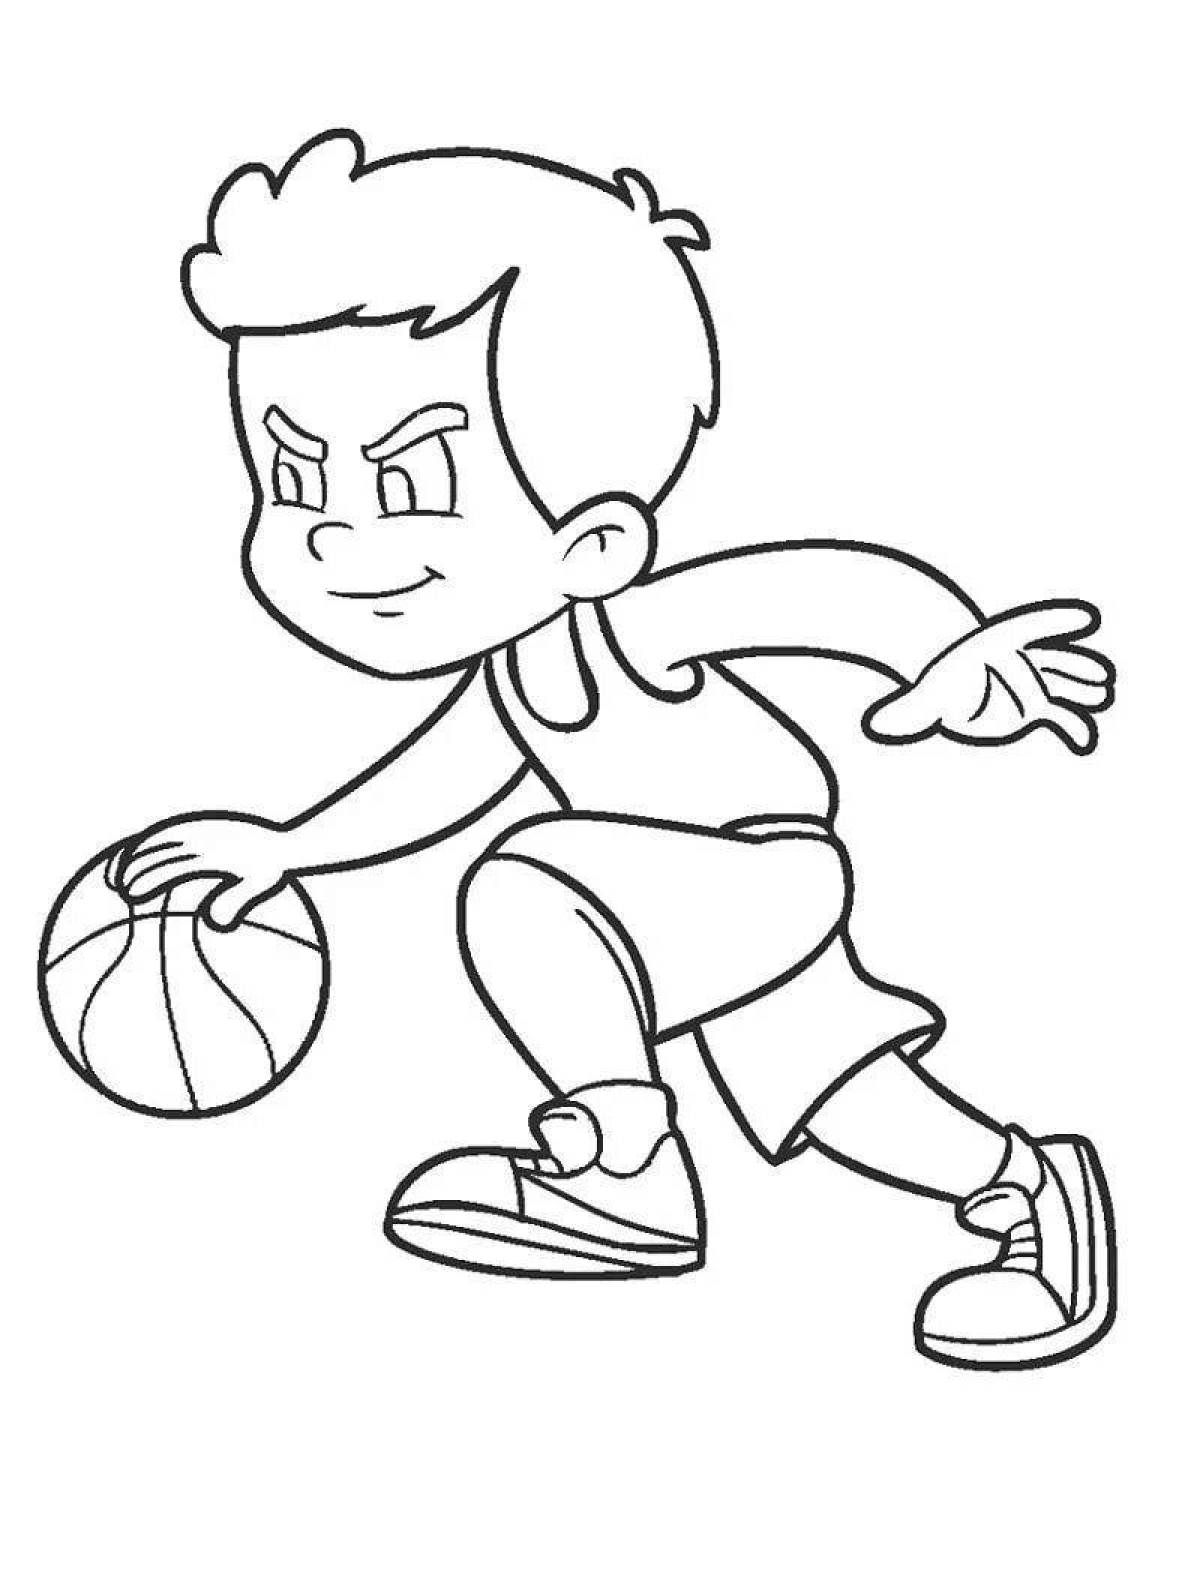 Outstanding sports coloring book for 6-7 year olds